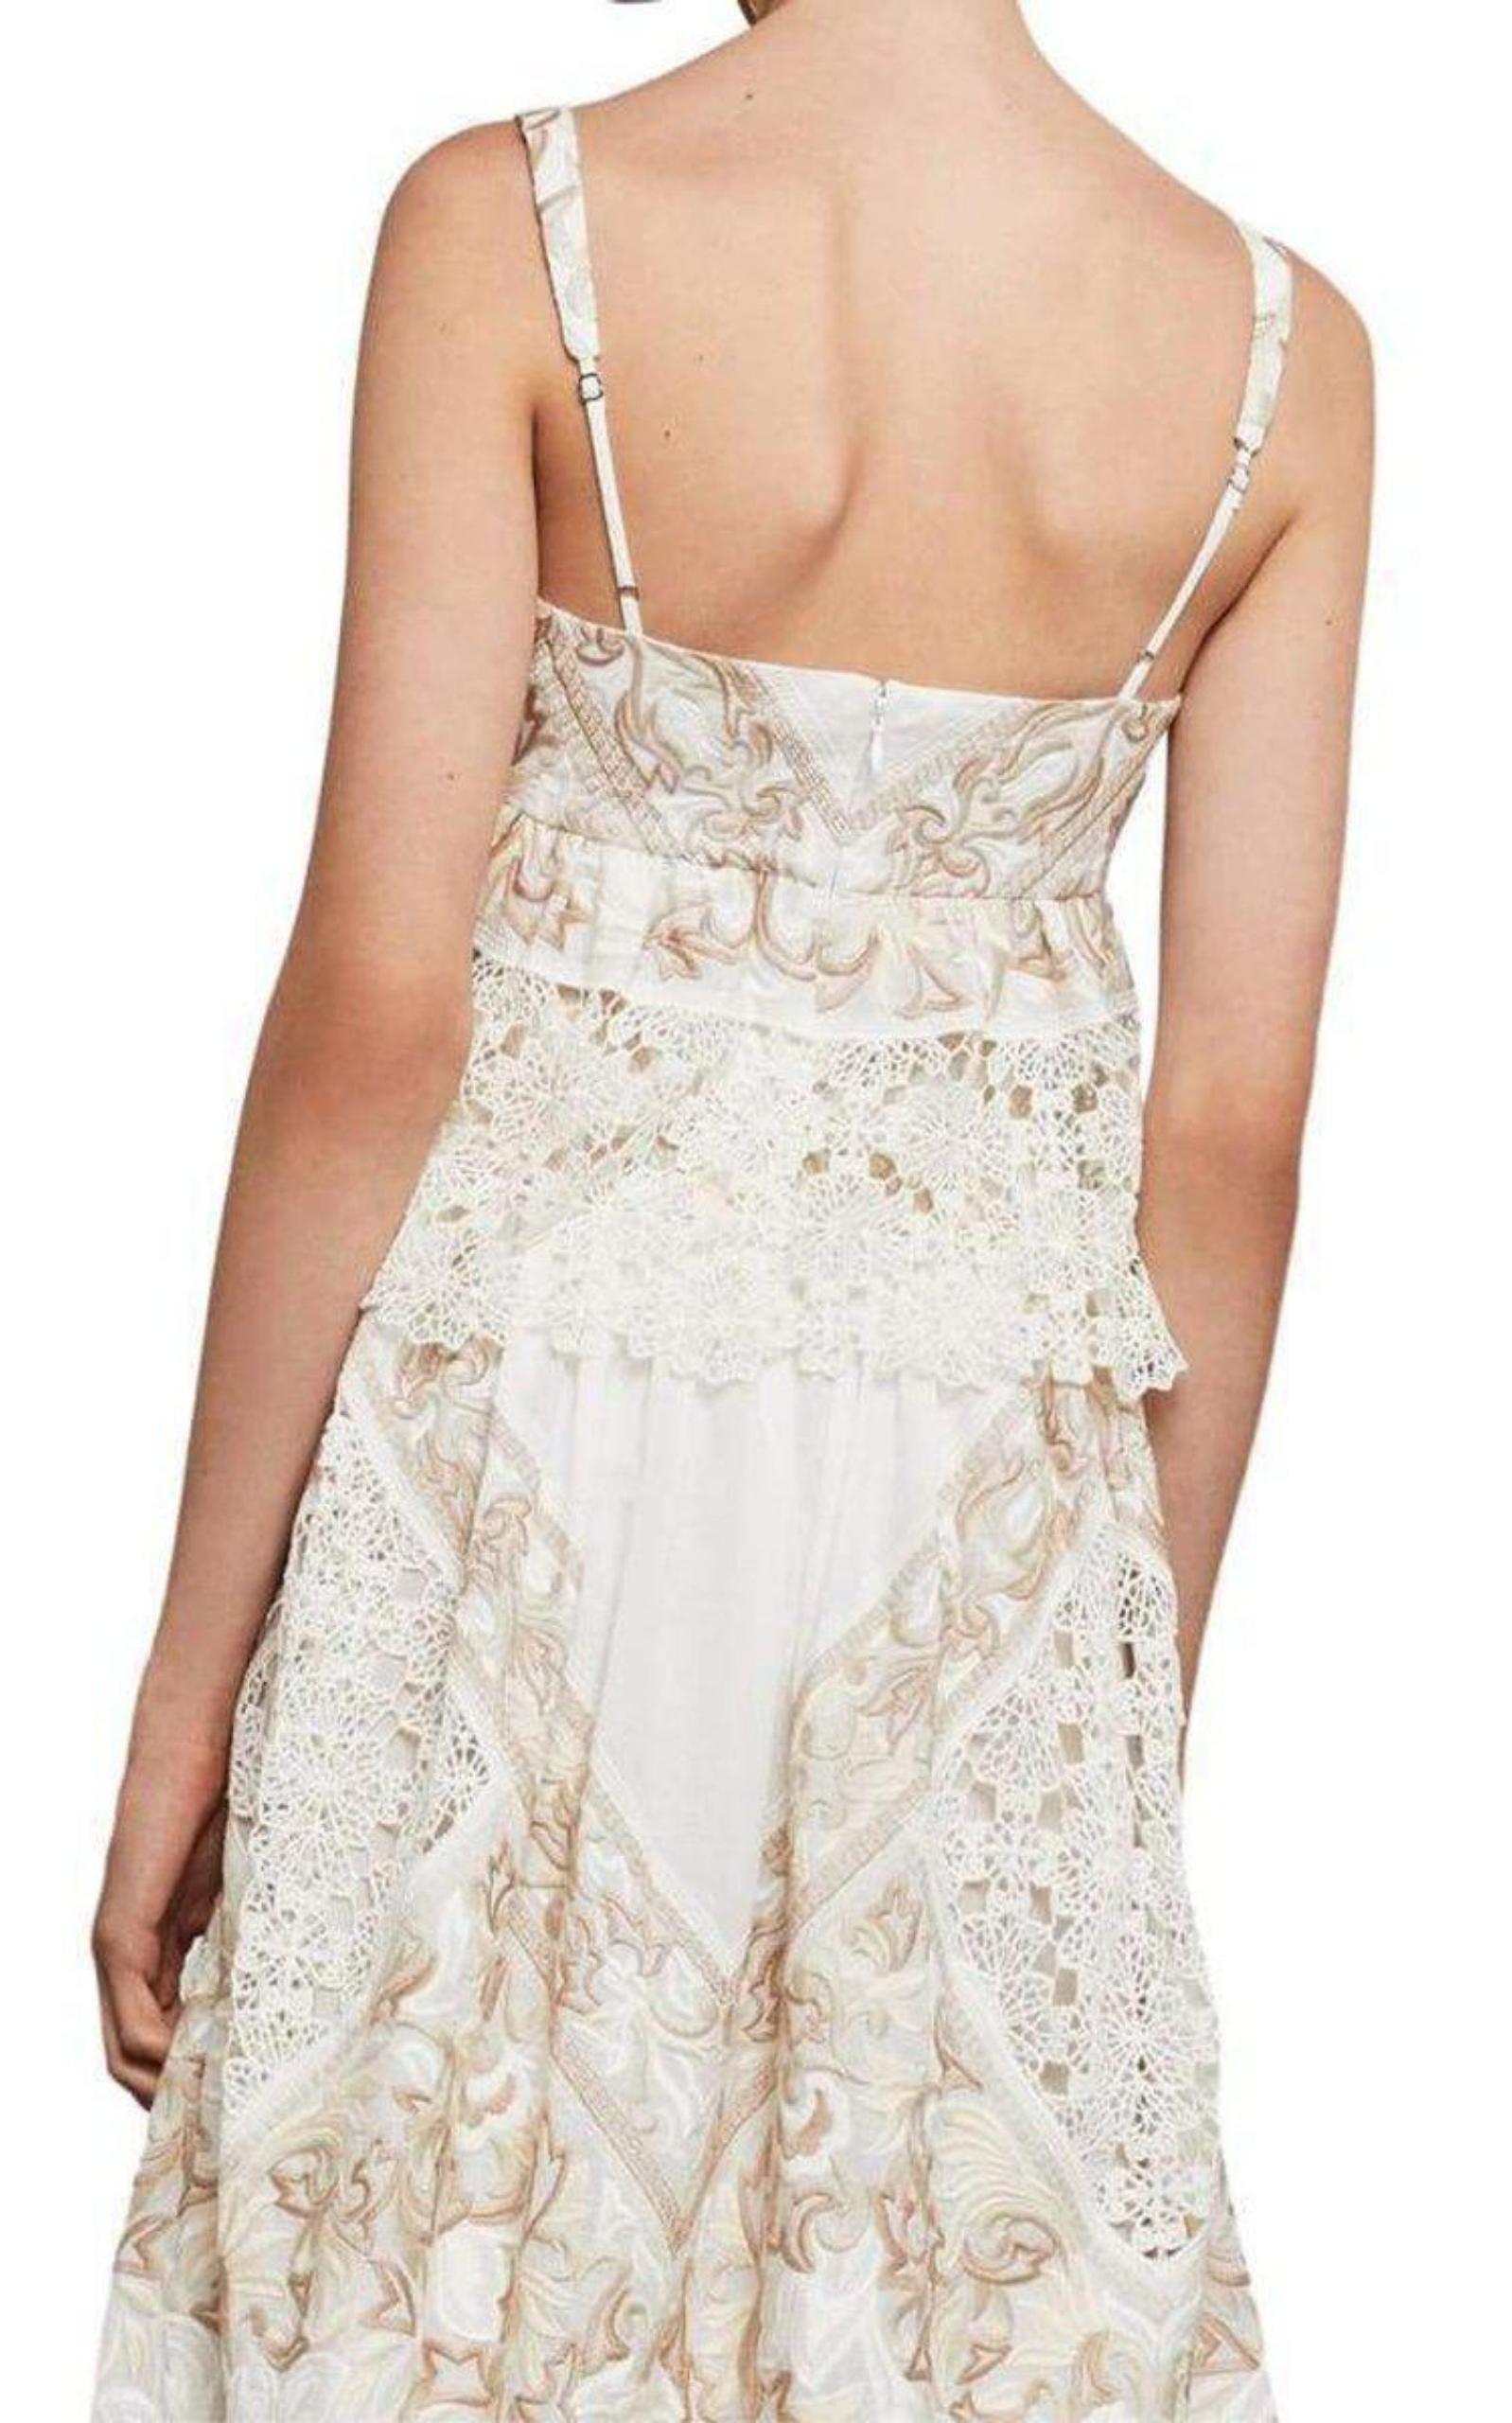  BCBGMAXAZRIAFloral Embroidered Tank Top - Runway Catalog